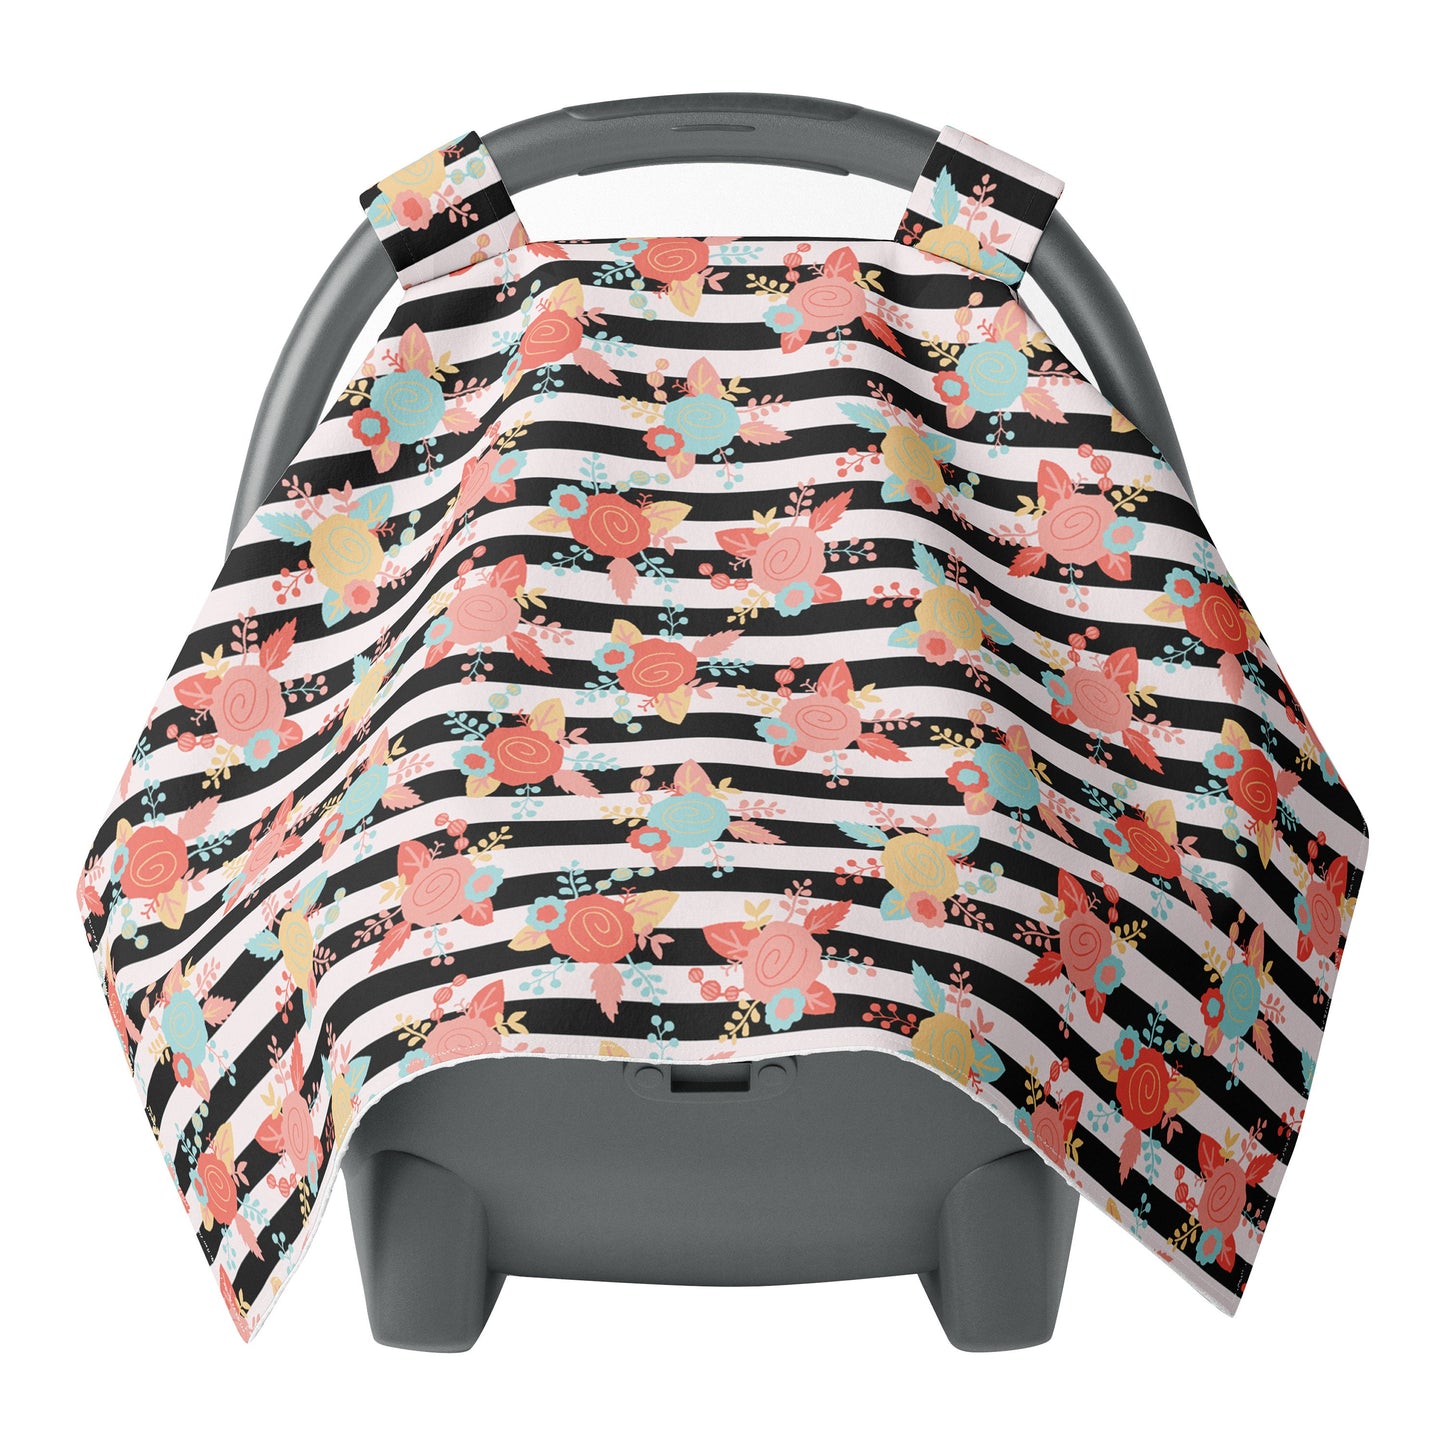 Car seat Covers for Babies, Carseat Canopy, Baby car seat Cover for Infant